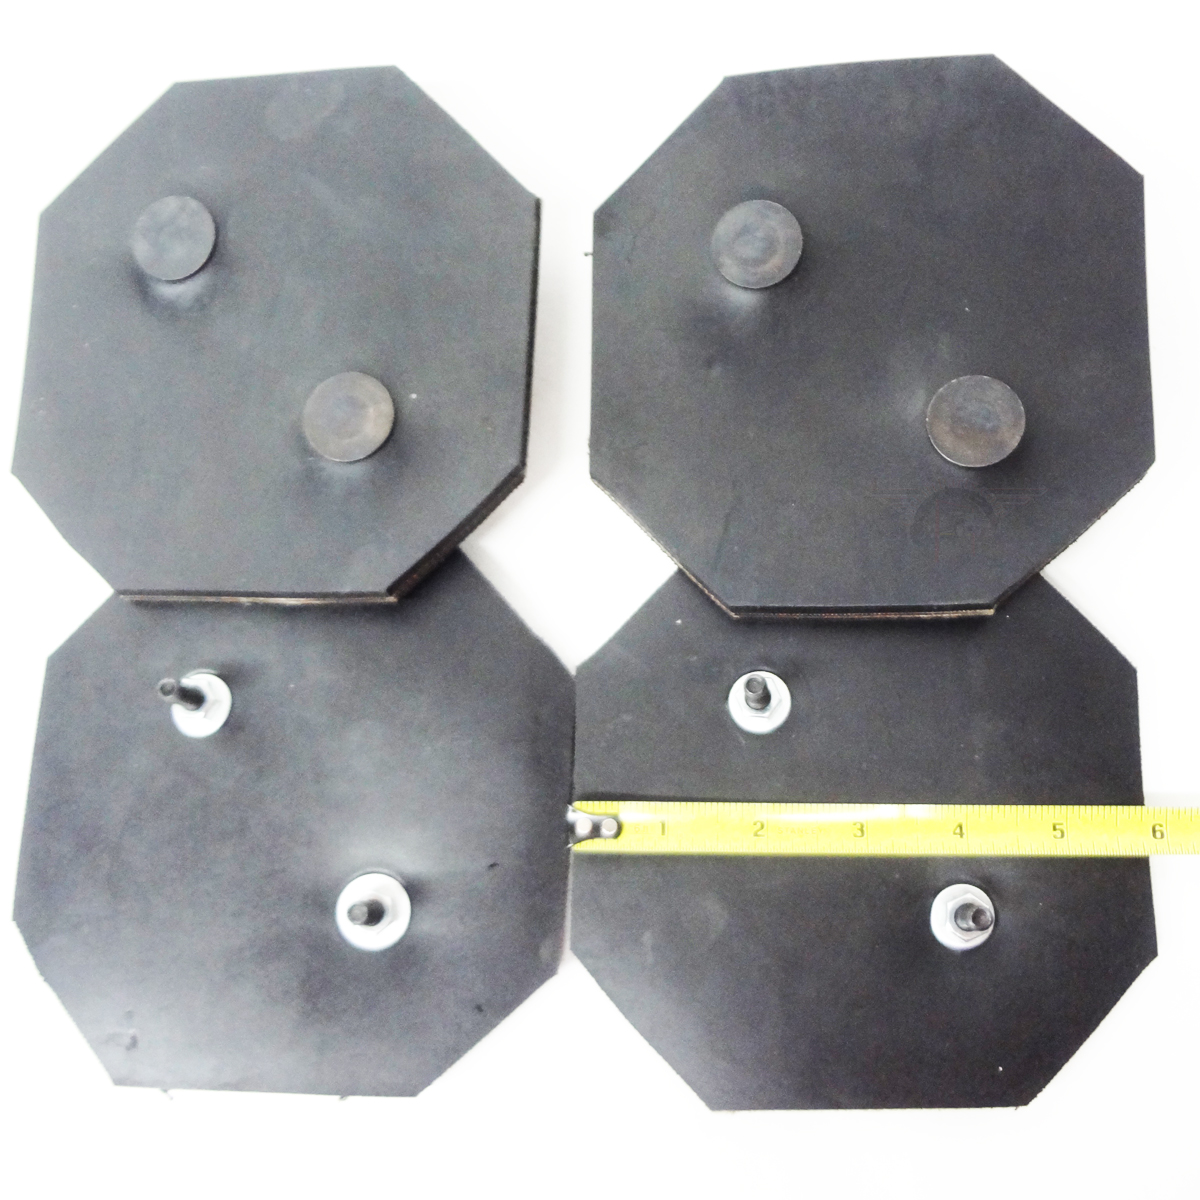 Rubber Arm Pad for Challenger Lift VBM Lifts Set of 4 pads Octagon pad kit 